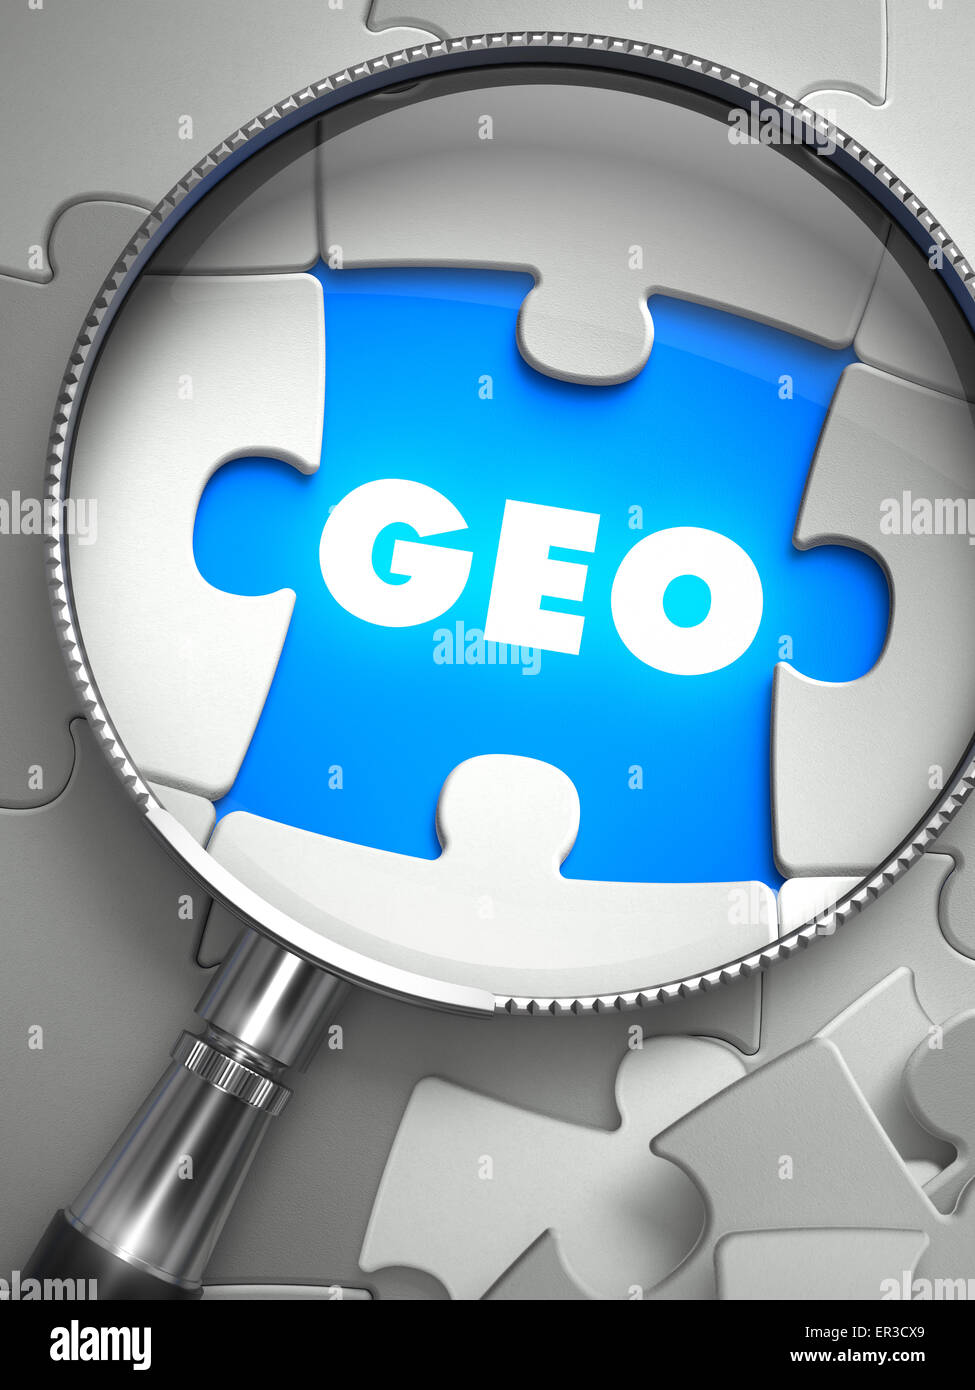 GEO - Missing Puzzle Piece through Magnifier. Stock Photo